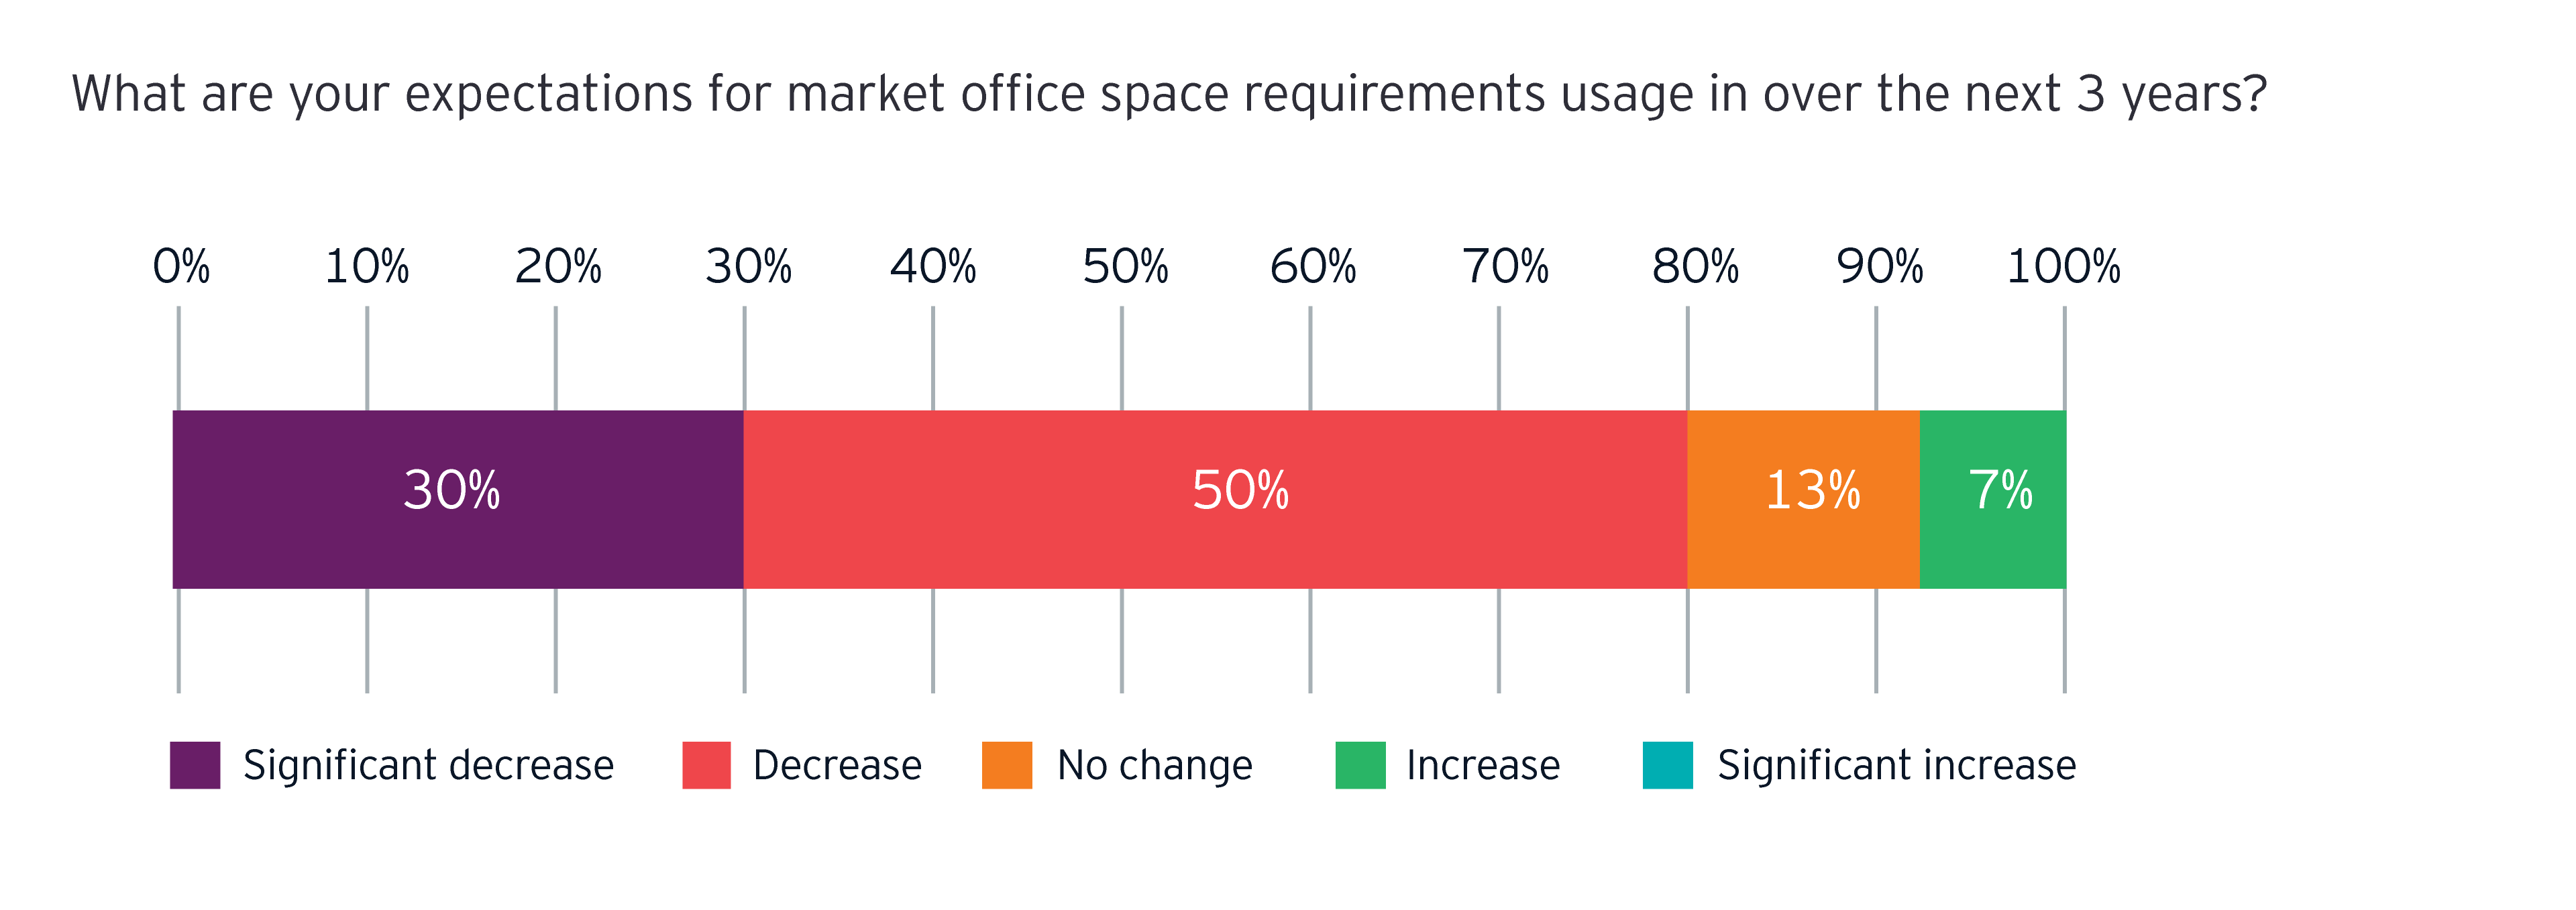 What are your expectations for market office space requirements usage in over the next 3 years?